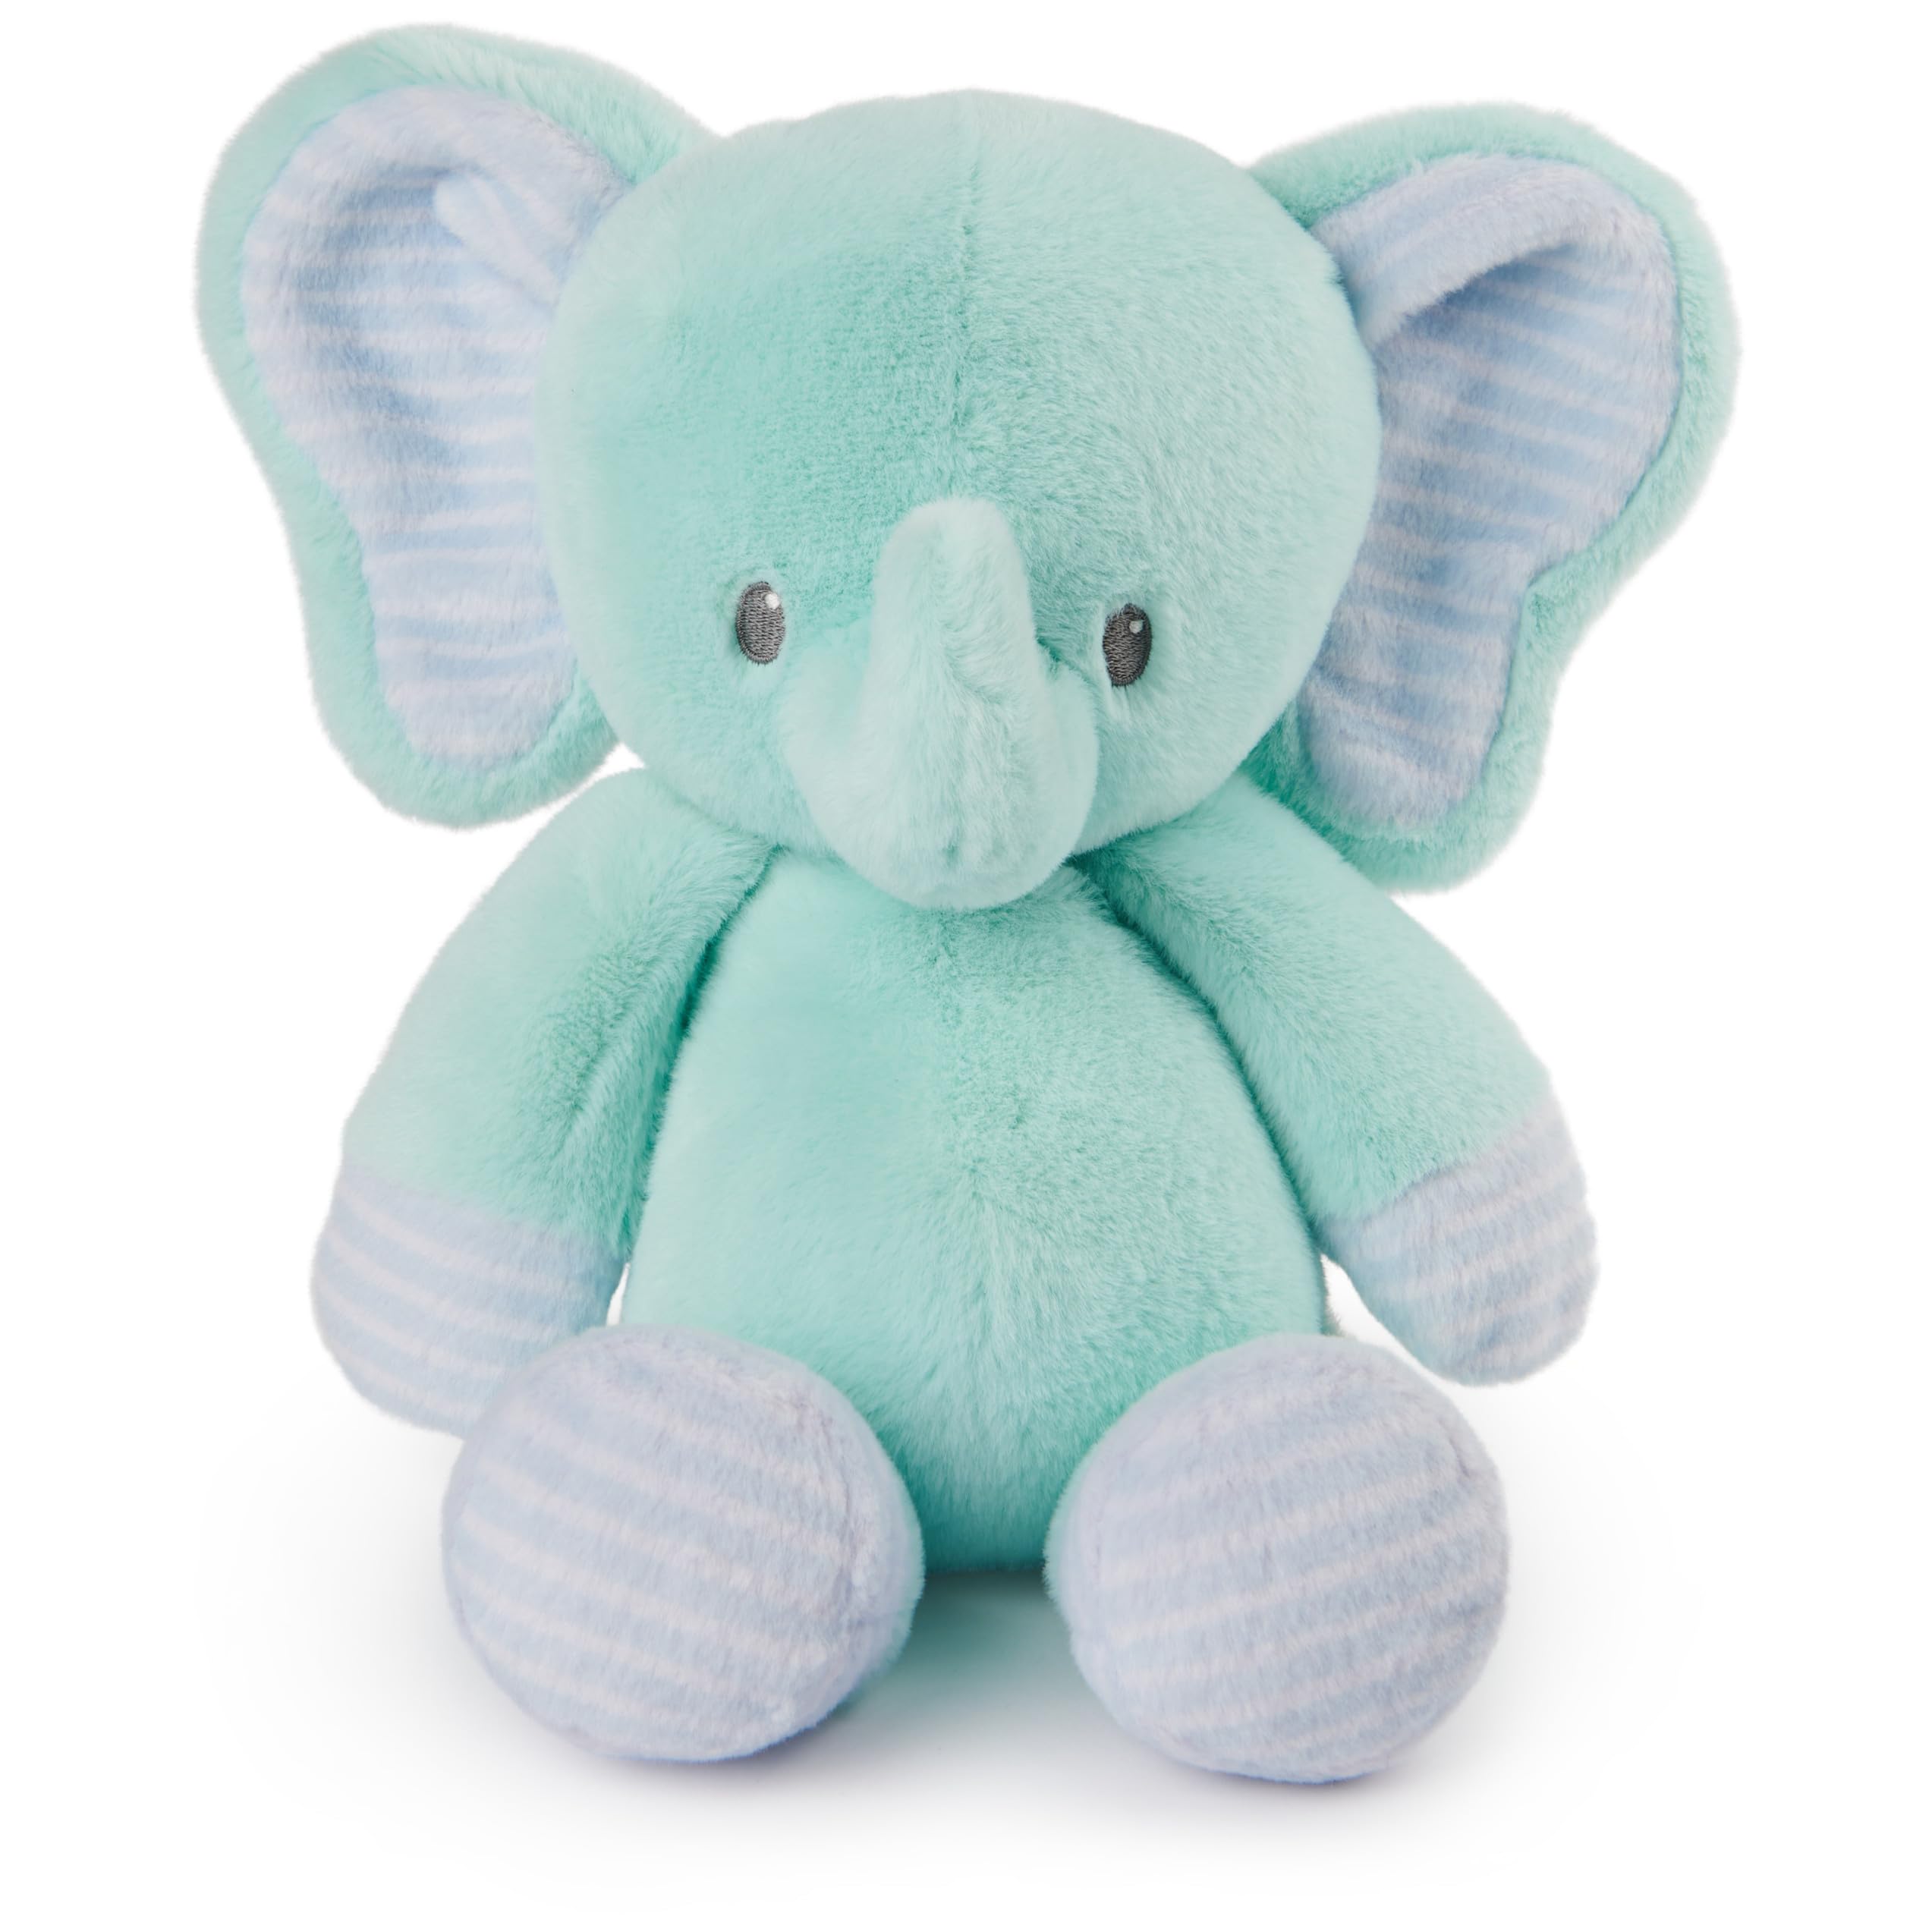 GUND Baby Safari Friends Elephant Pull-Down Musical Plush, Travel Friendly Sensory Toy with Stroller Loop for Ages 0 and Up, Blue, 12”